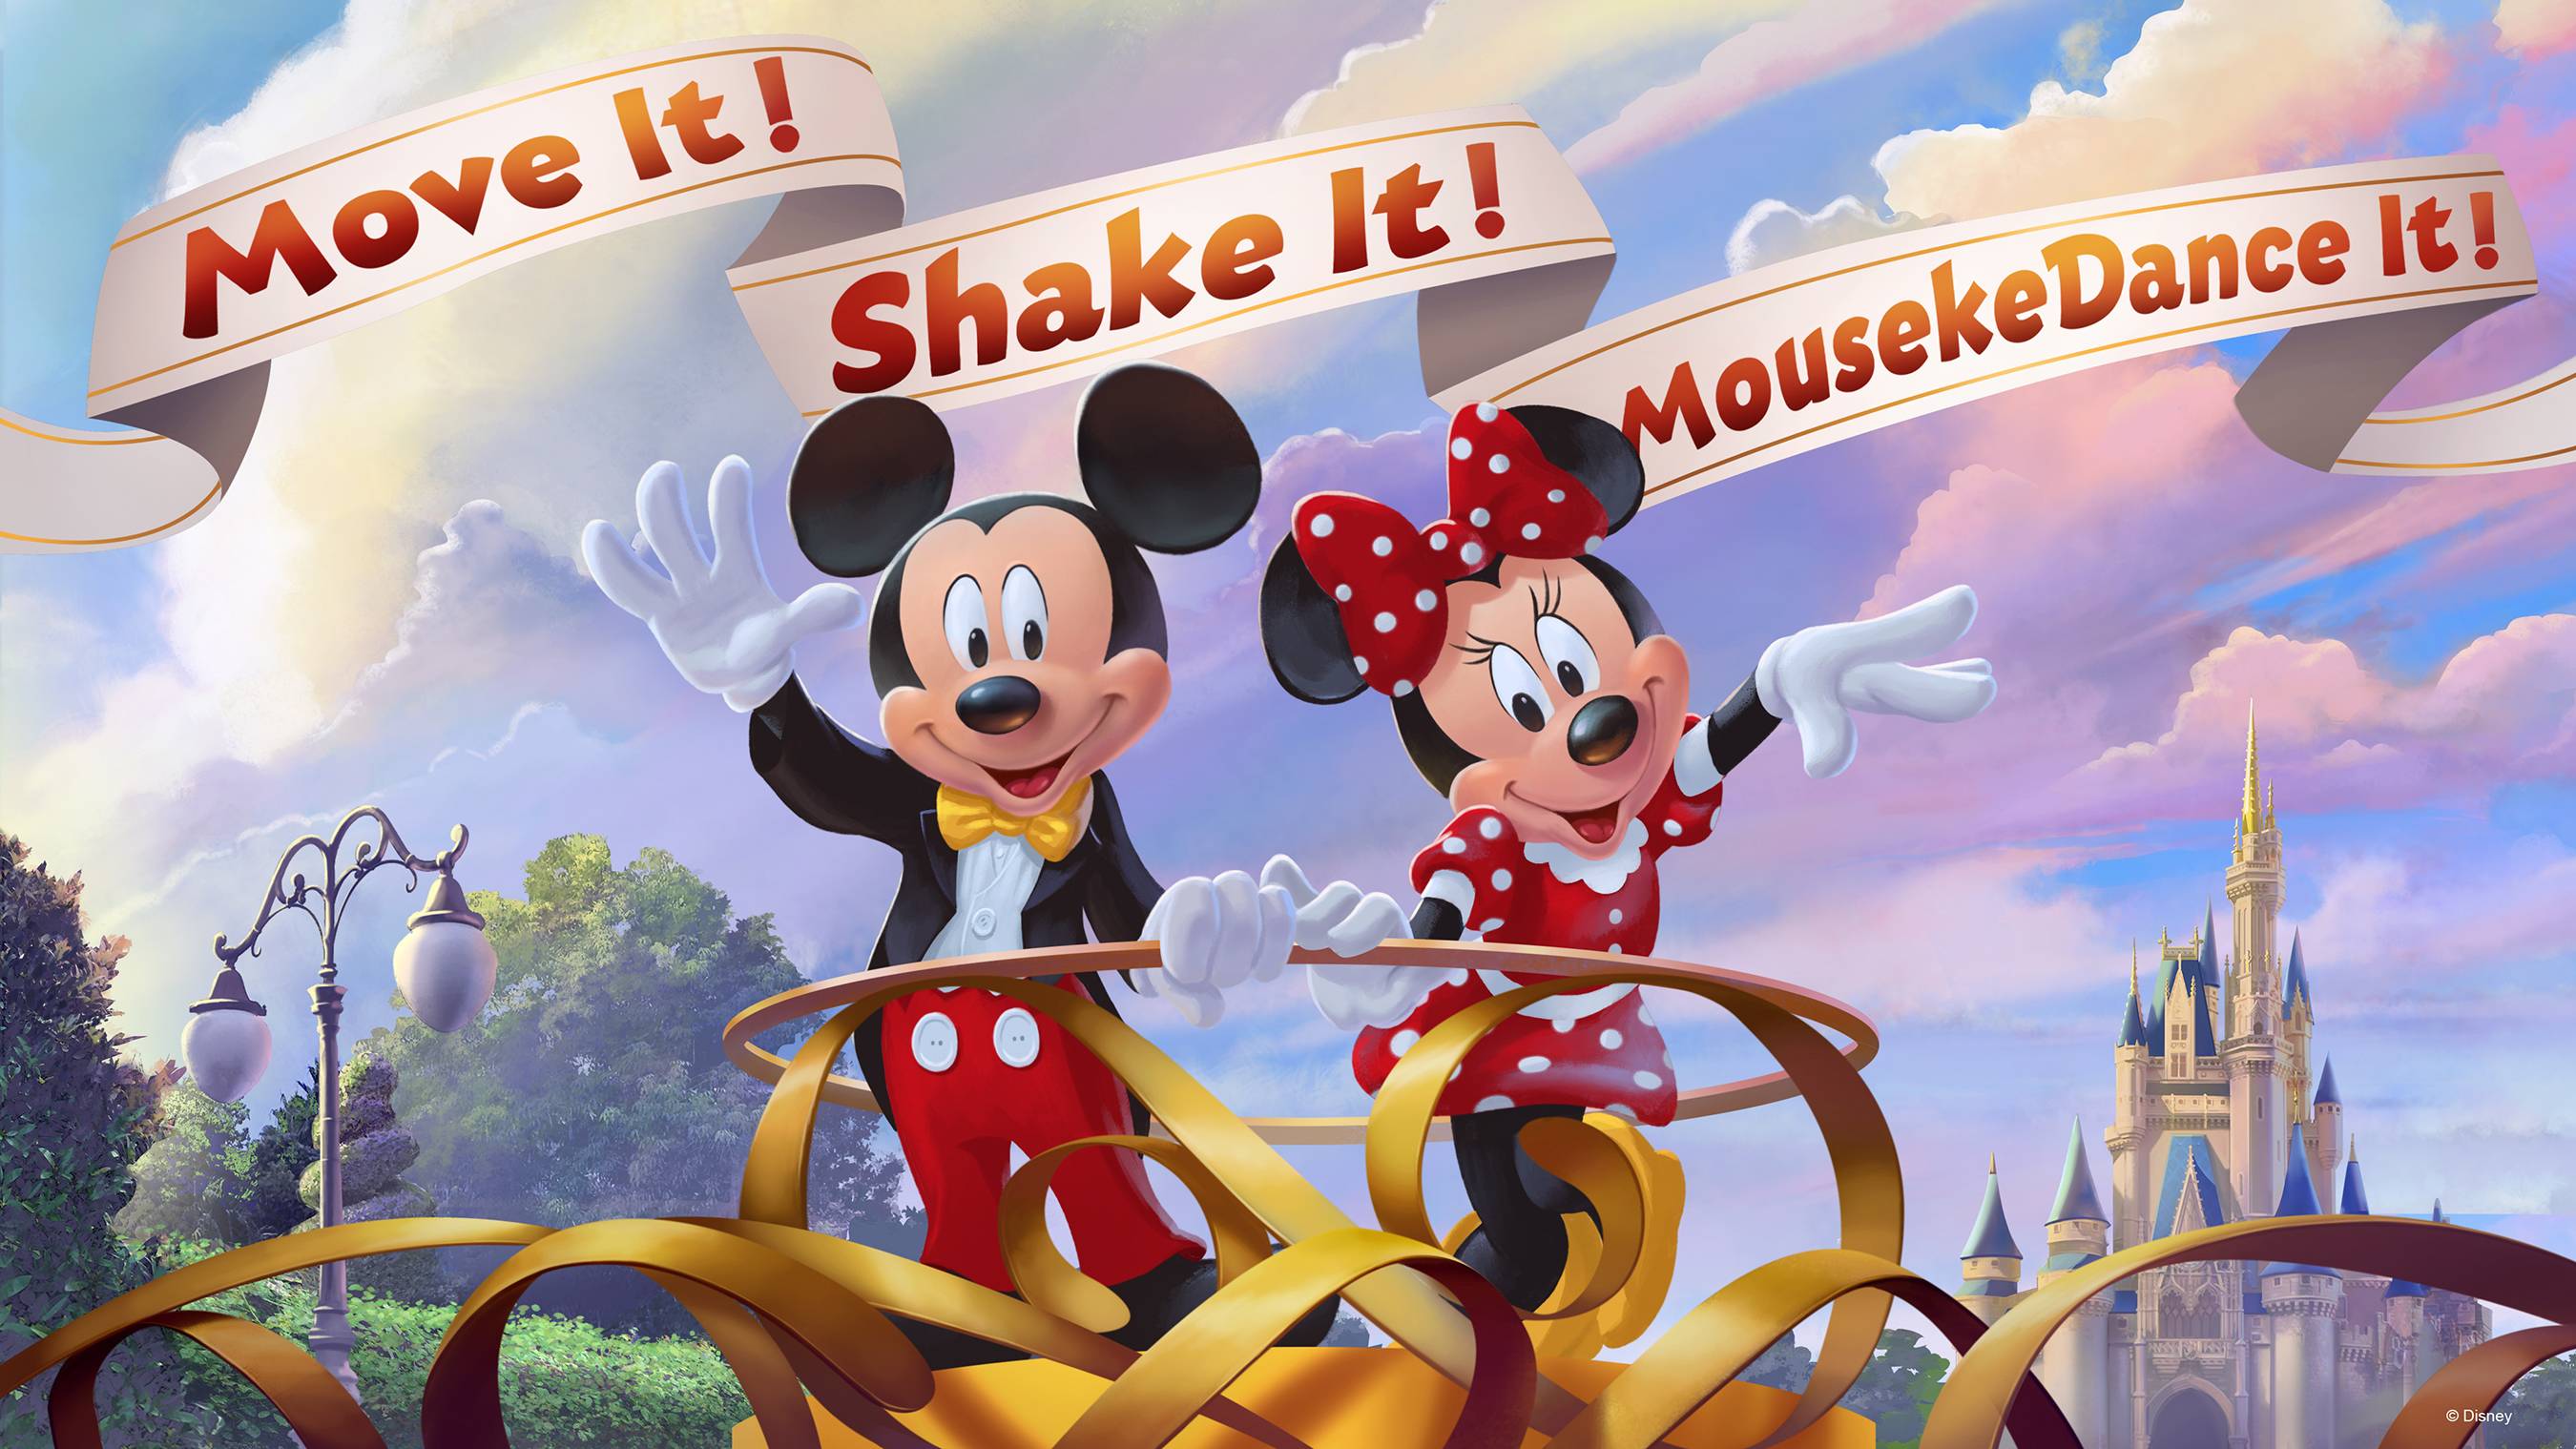 Move It! Shake It! MousekeDance It! Street Party concept art